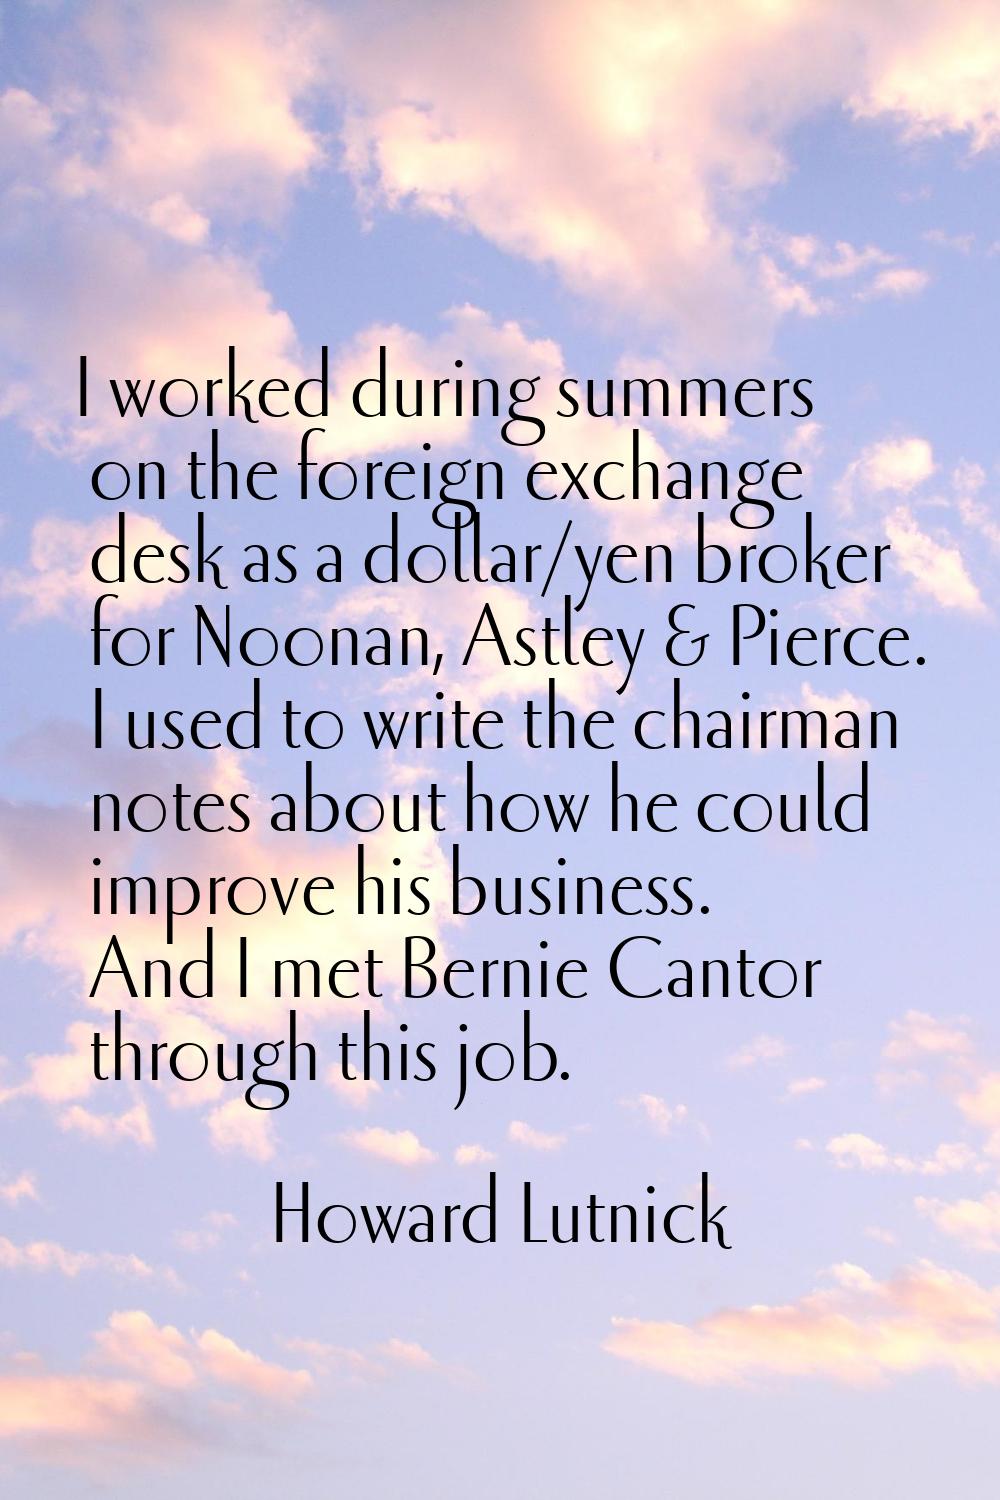 I worked during summers on the foreign exchange desk as a dollar/yen broker for Noonan, Astley & Pi